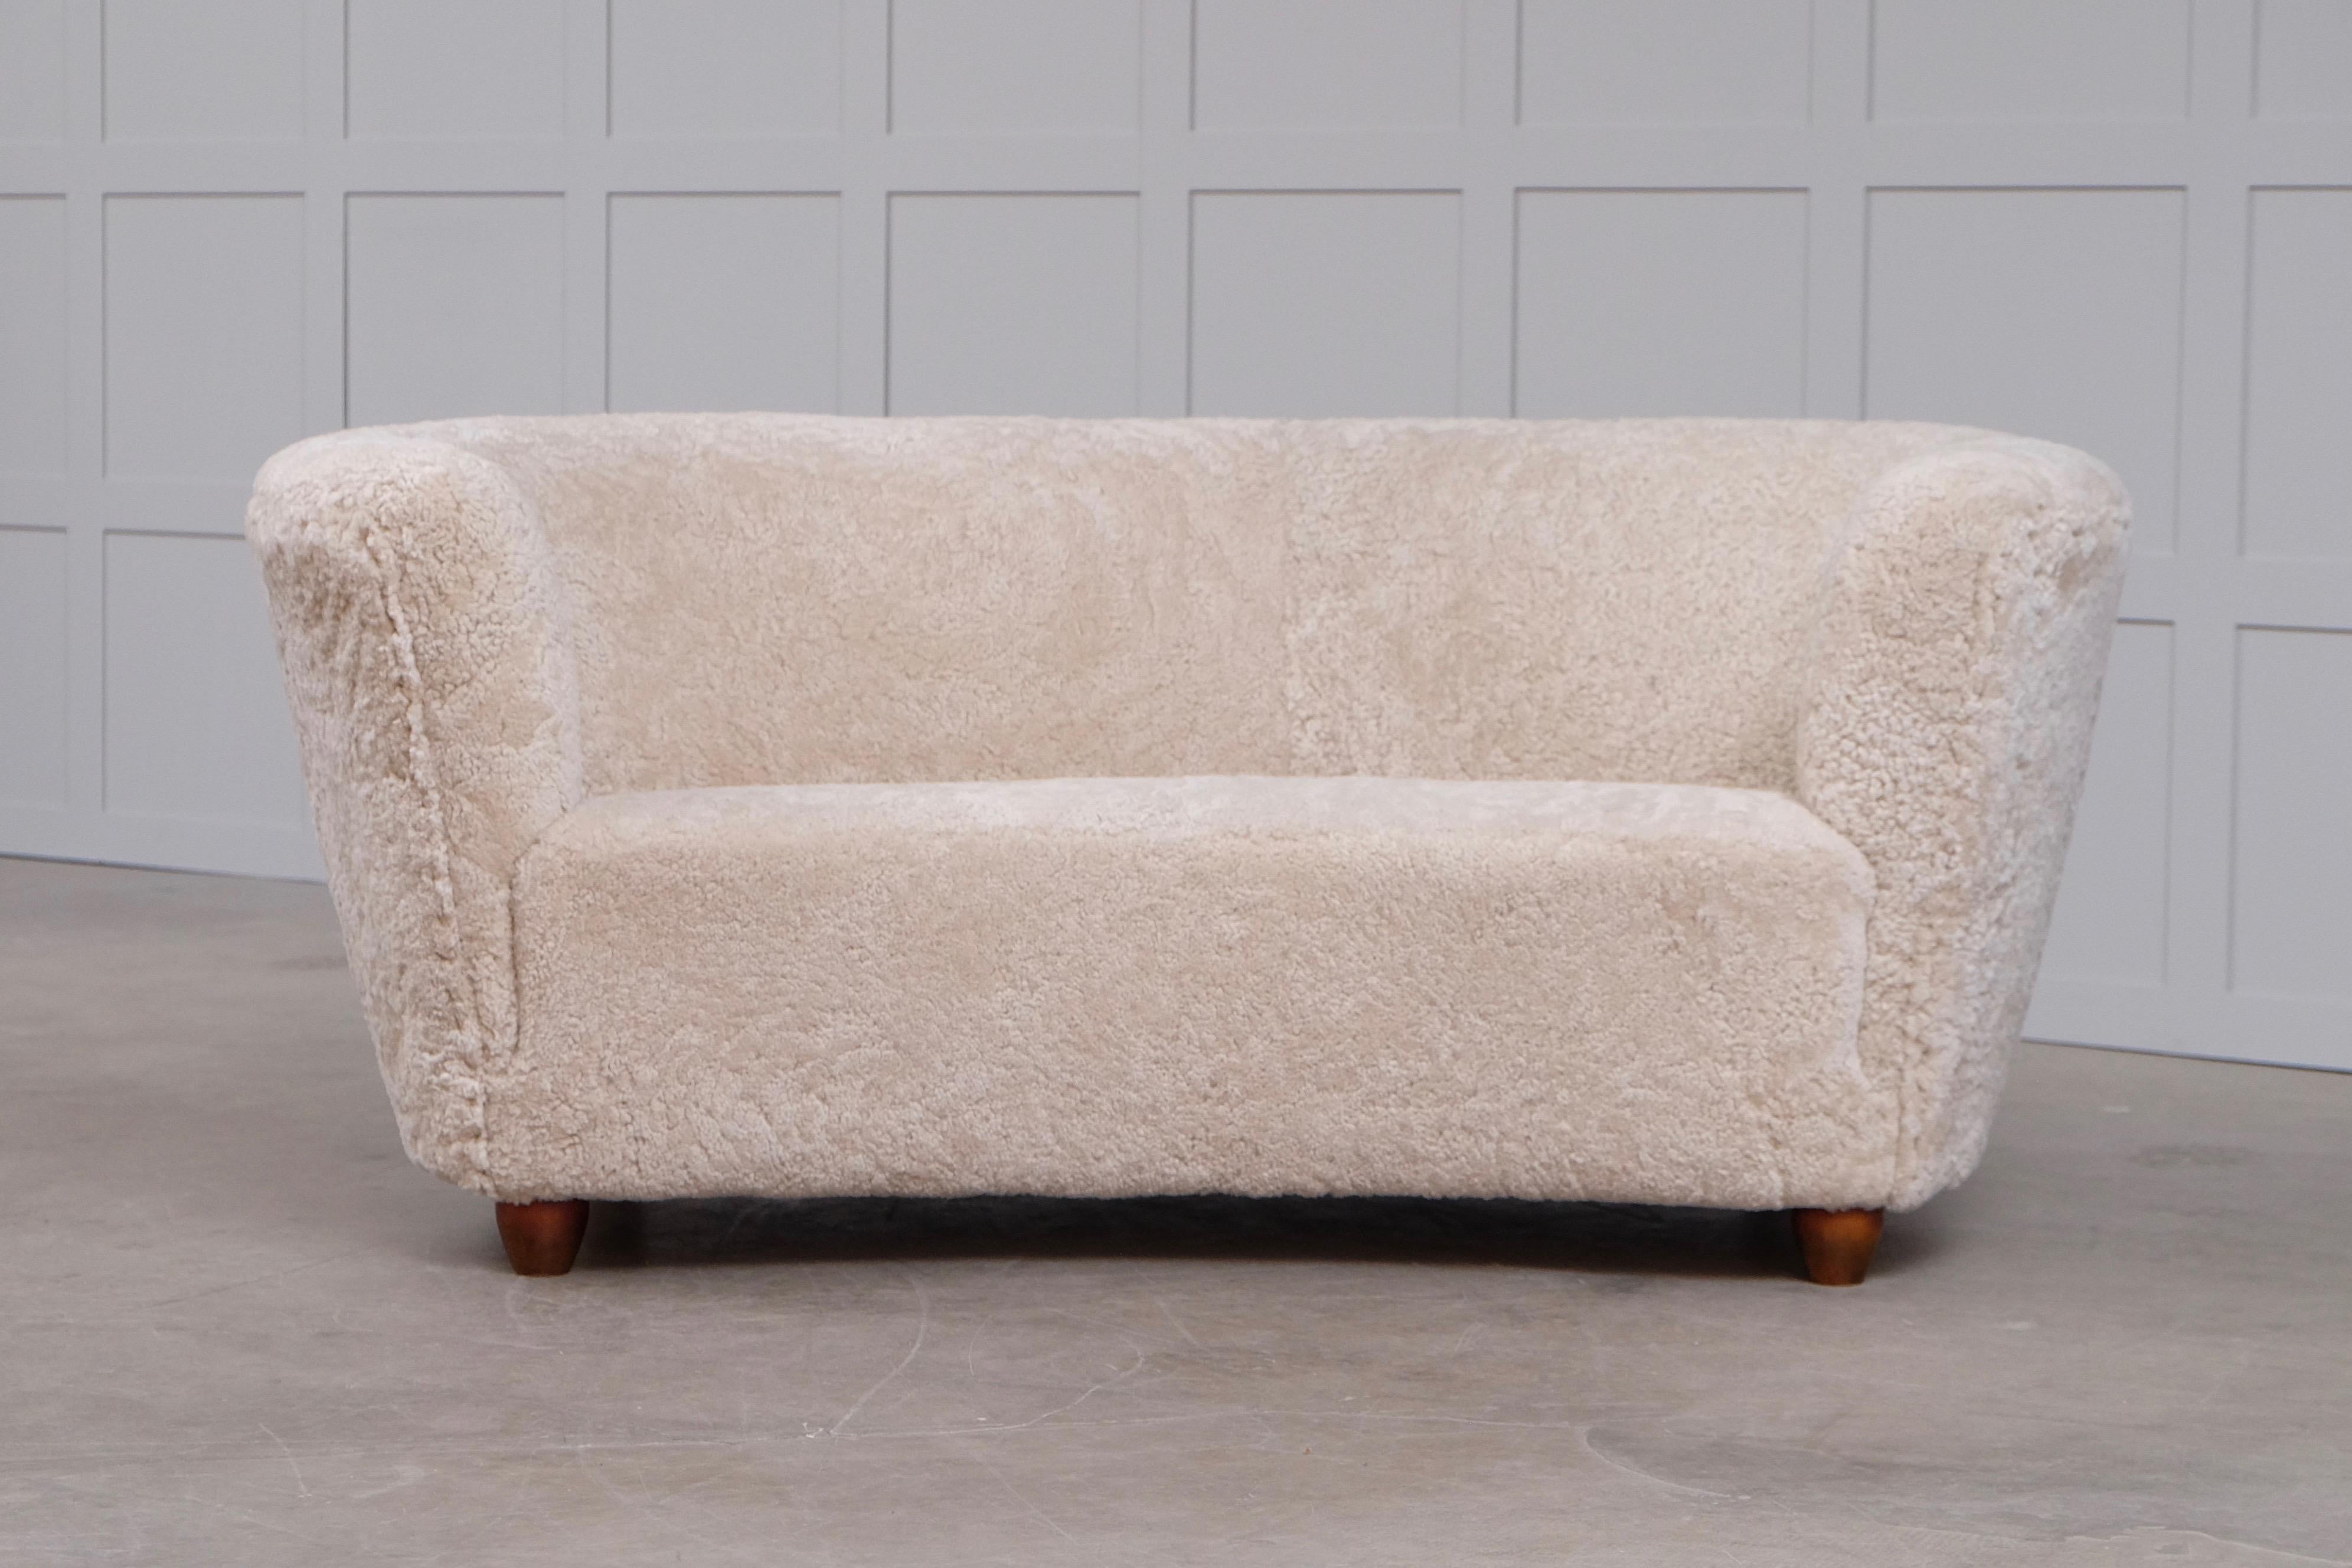 Curved Danish Sheepskin Sofa, 1940s In Good Condition For Sale In Stockholm, SE